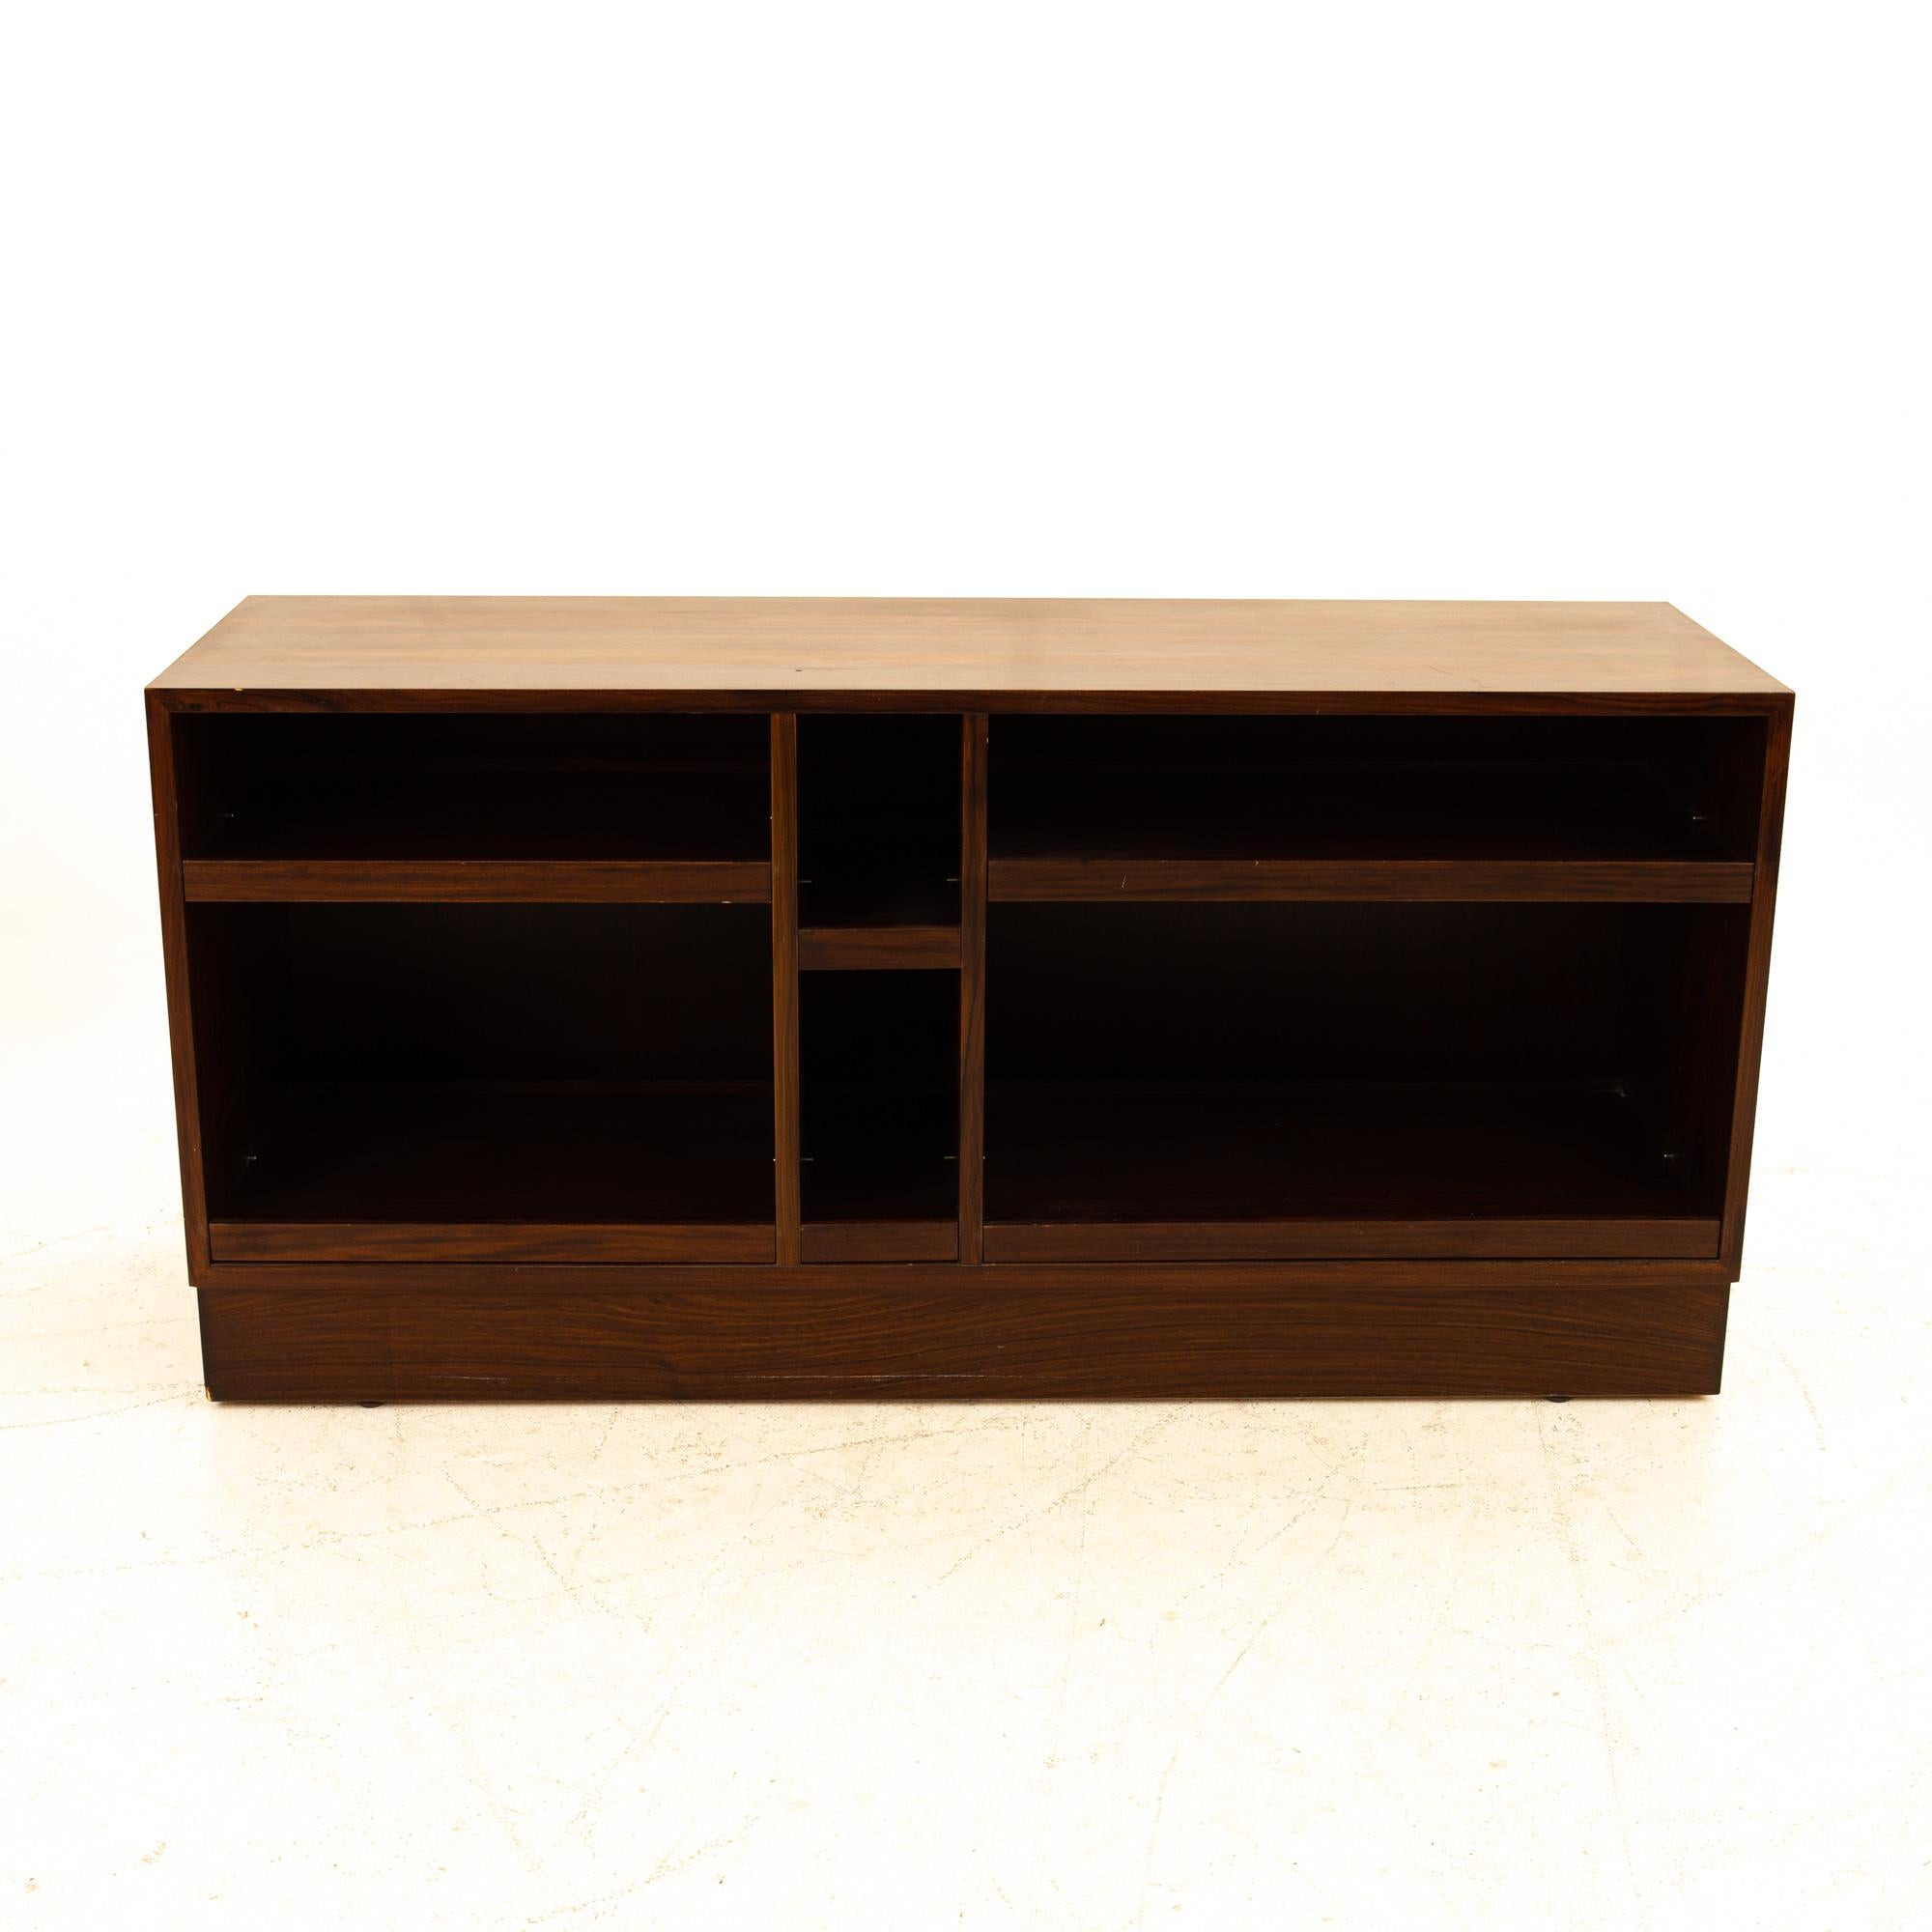 Mid Century rosewood media cabinet credenza
Entertainment center measures: 54.5 wide x 16.75 deep x 26.25 high

All pieces of furniture can be had in what we call restored vintage condition. That means the piece is restored upon purchase so it’s